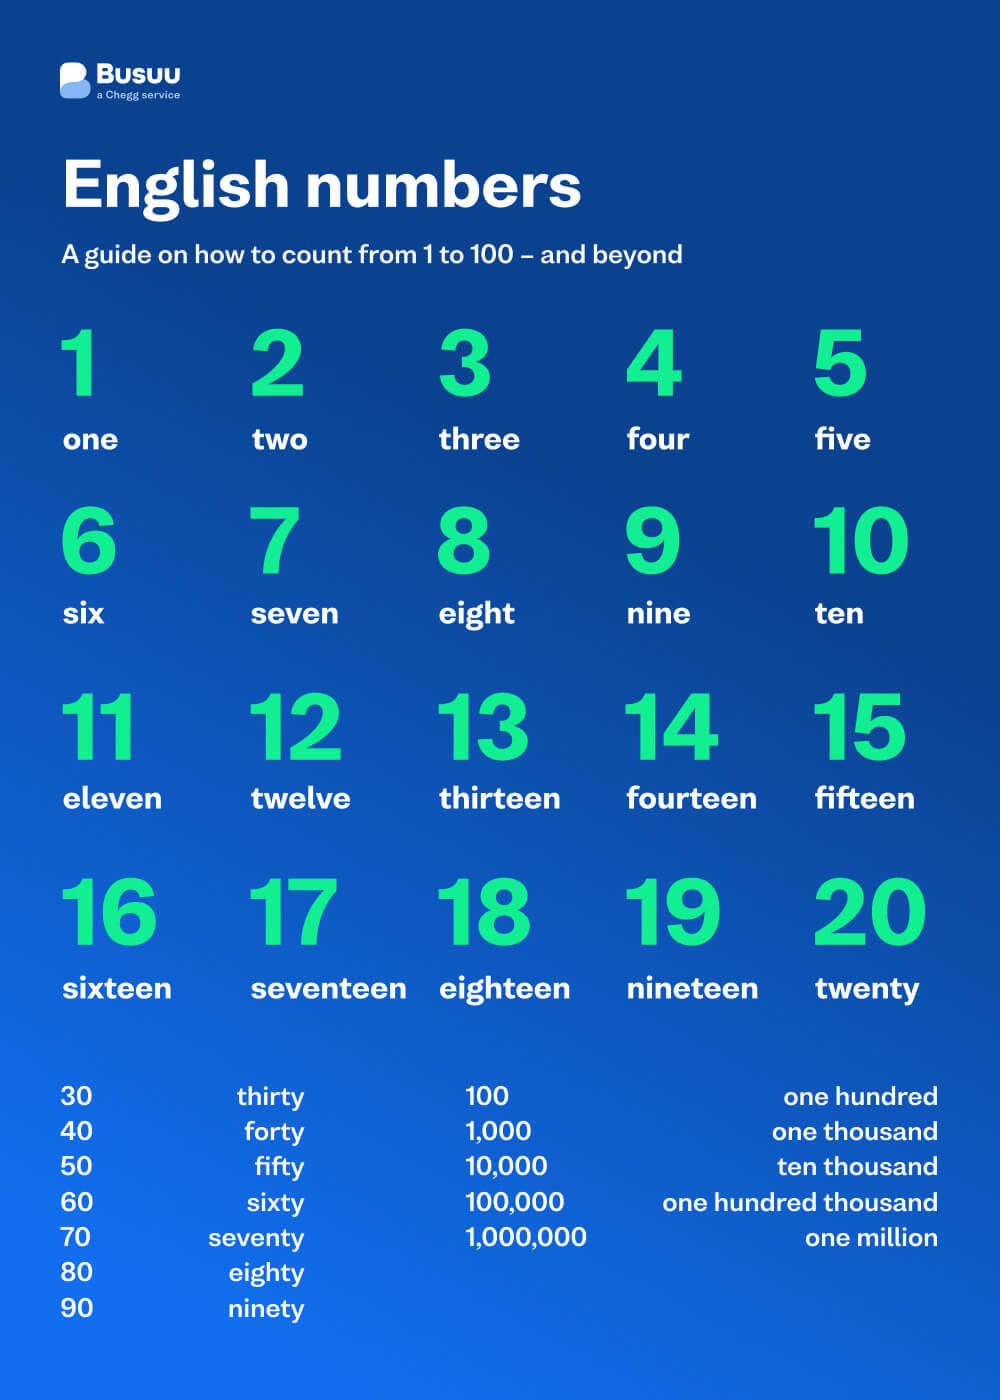 English Numbers Infographic 